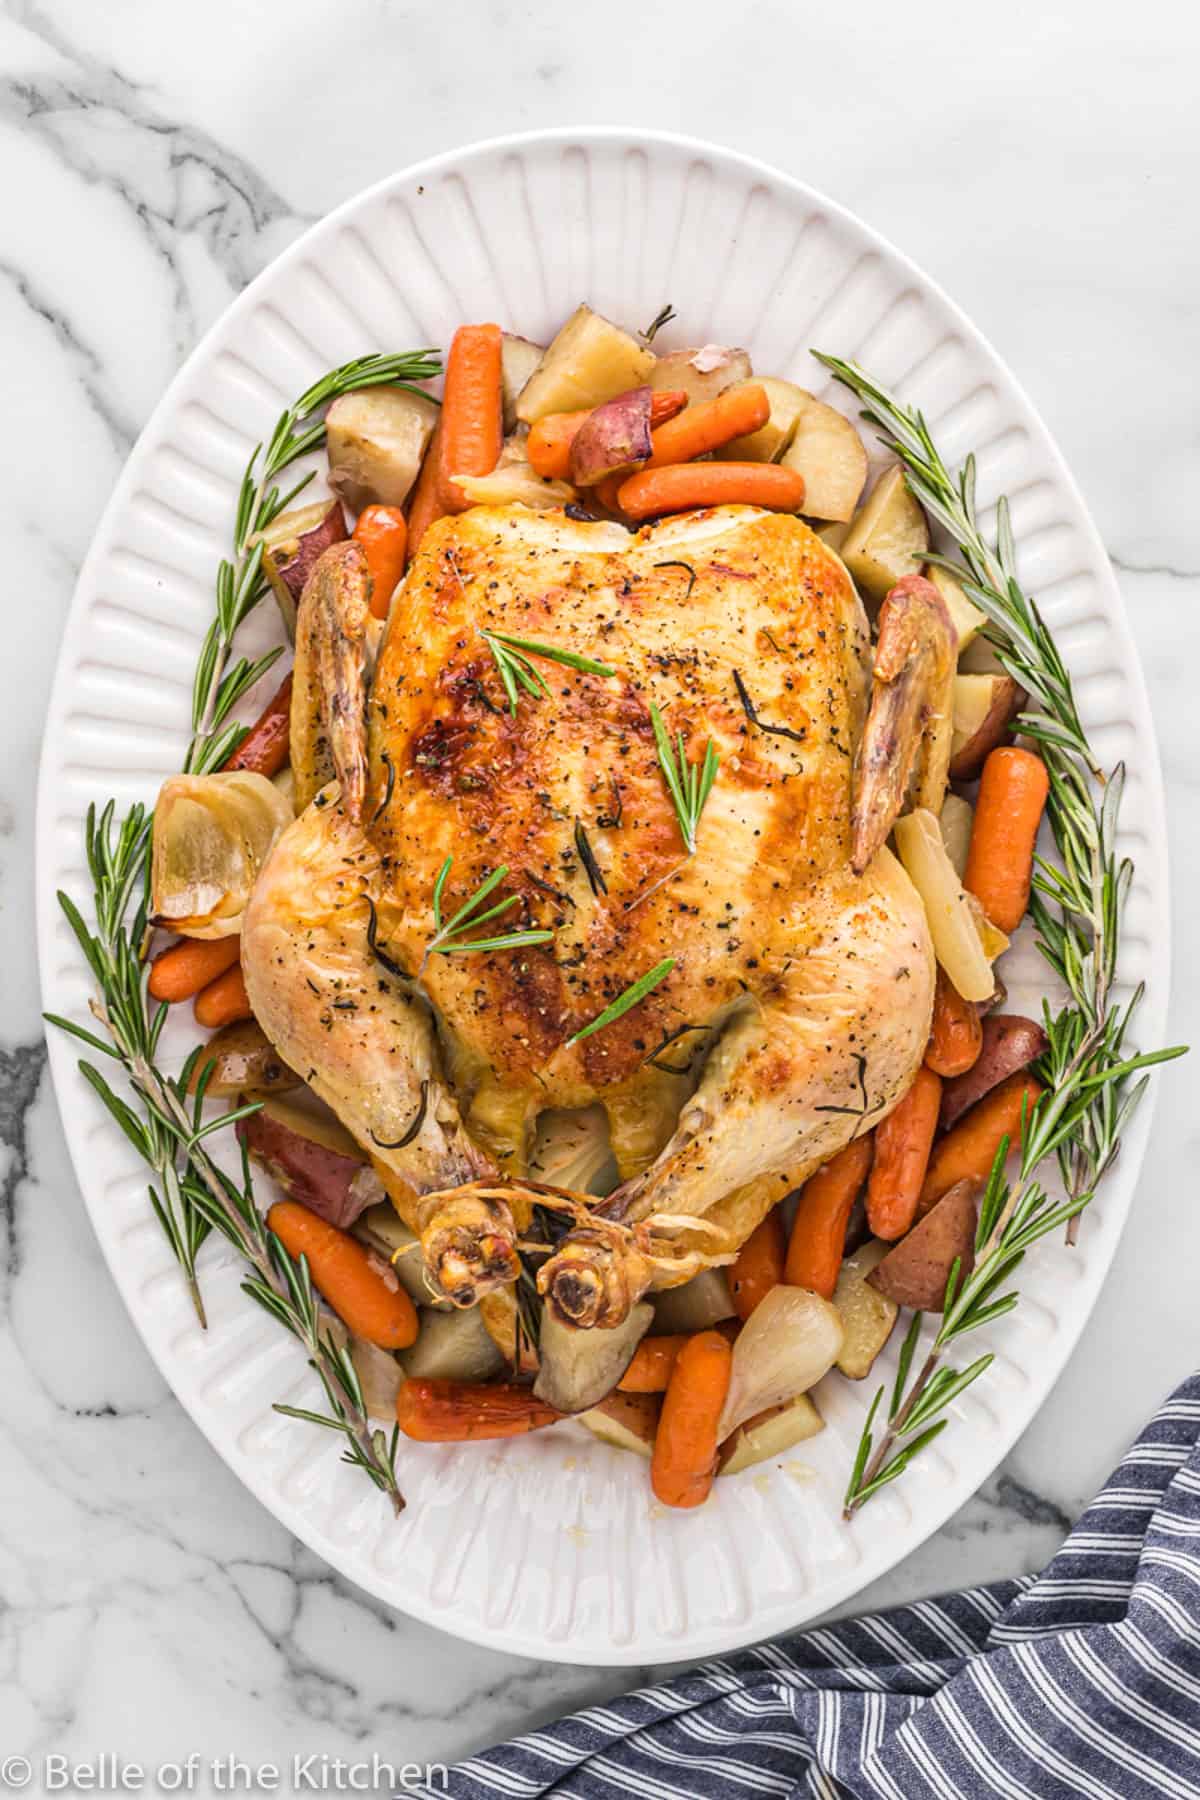 a whole roasted chicken on top of vegetables